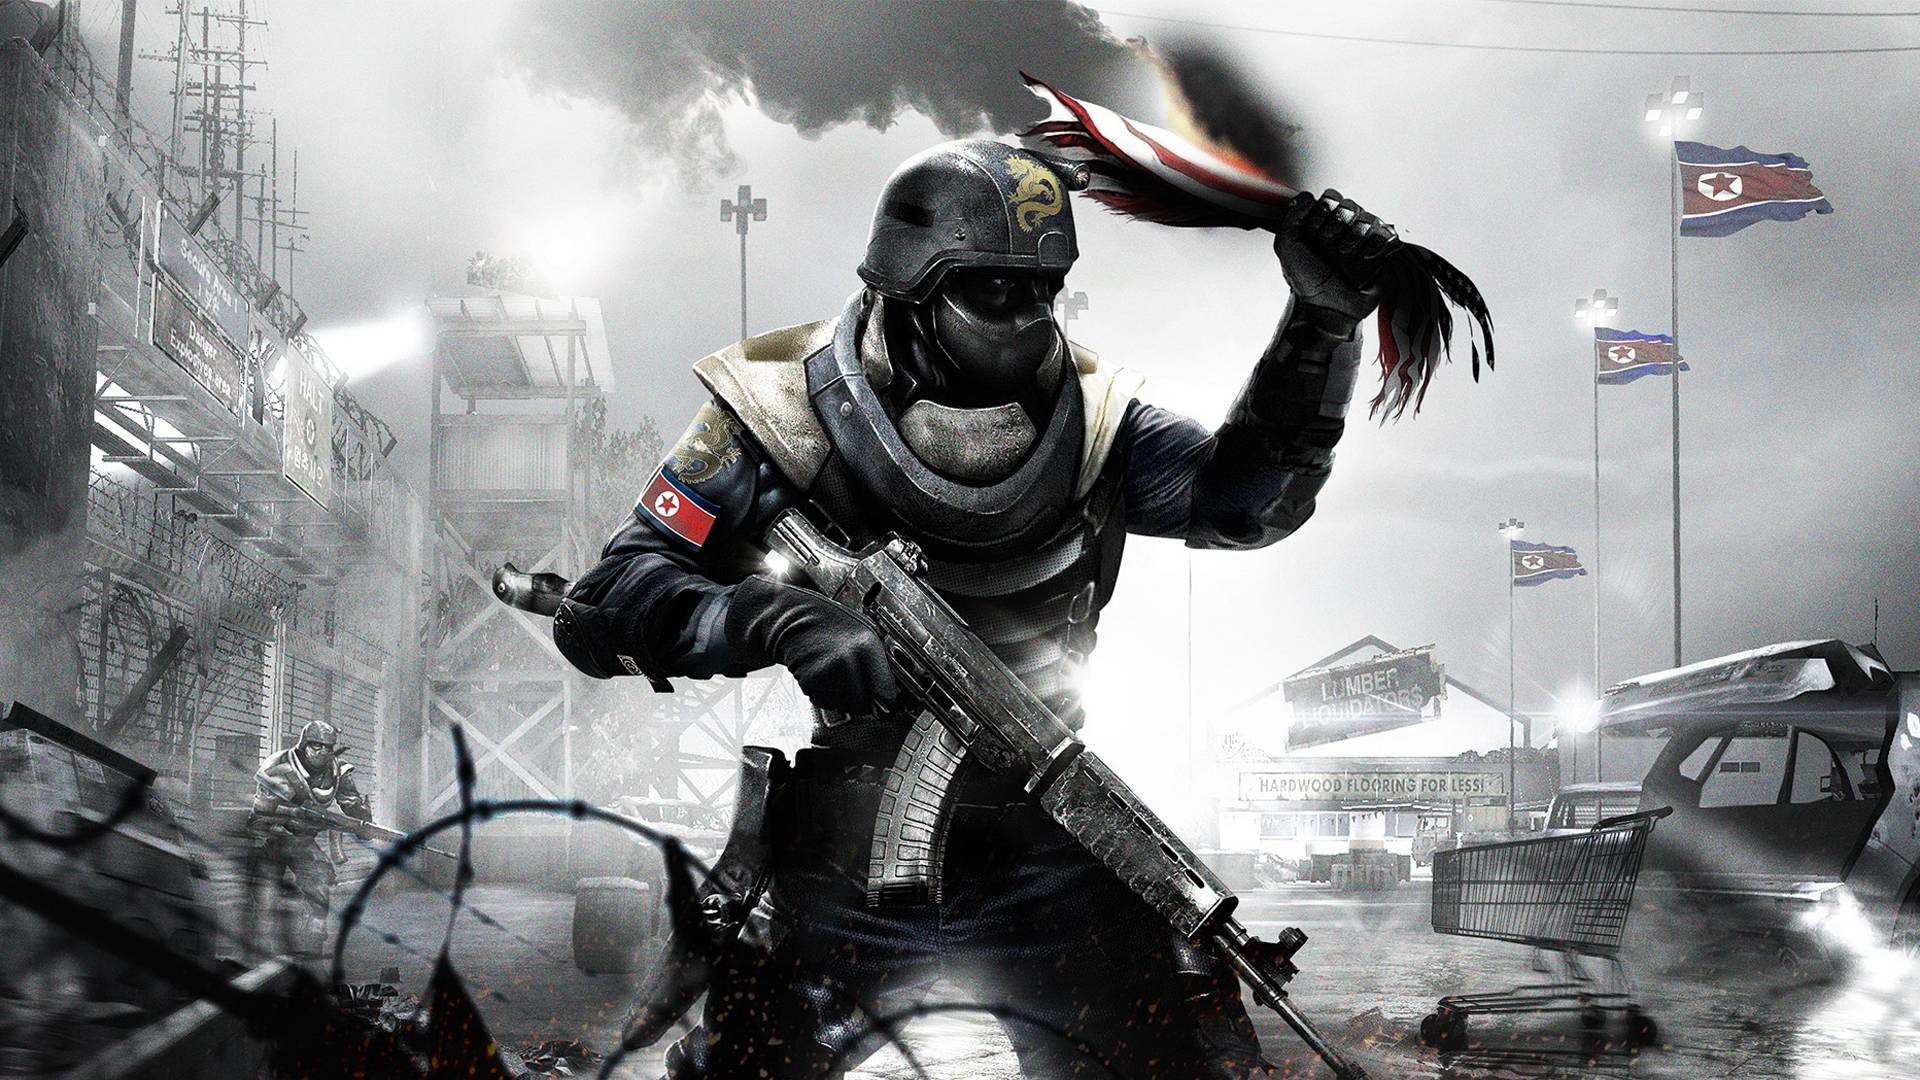 1920x1080 Homefront Wallpapers in full 1080P HD Â« GamingBolt.com: Video Game .